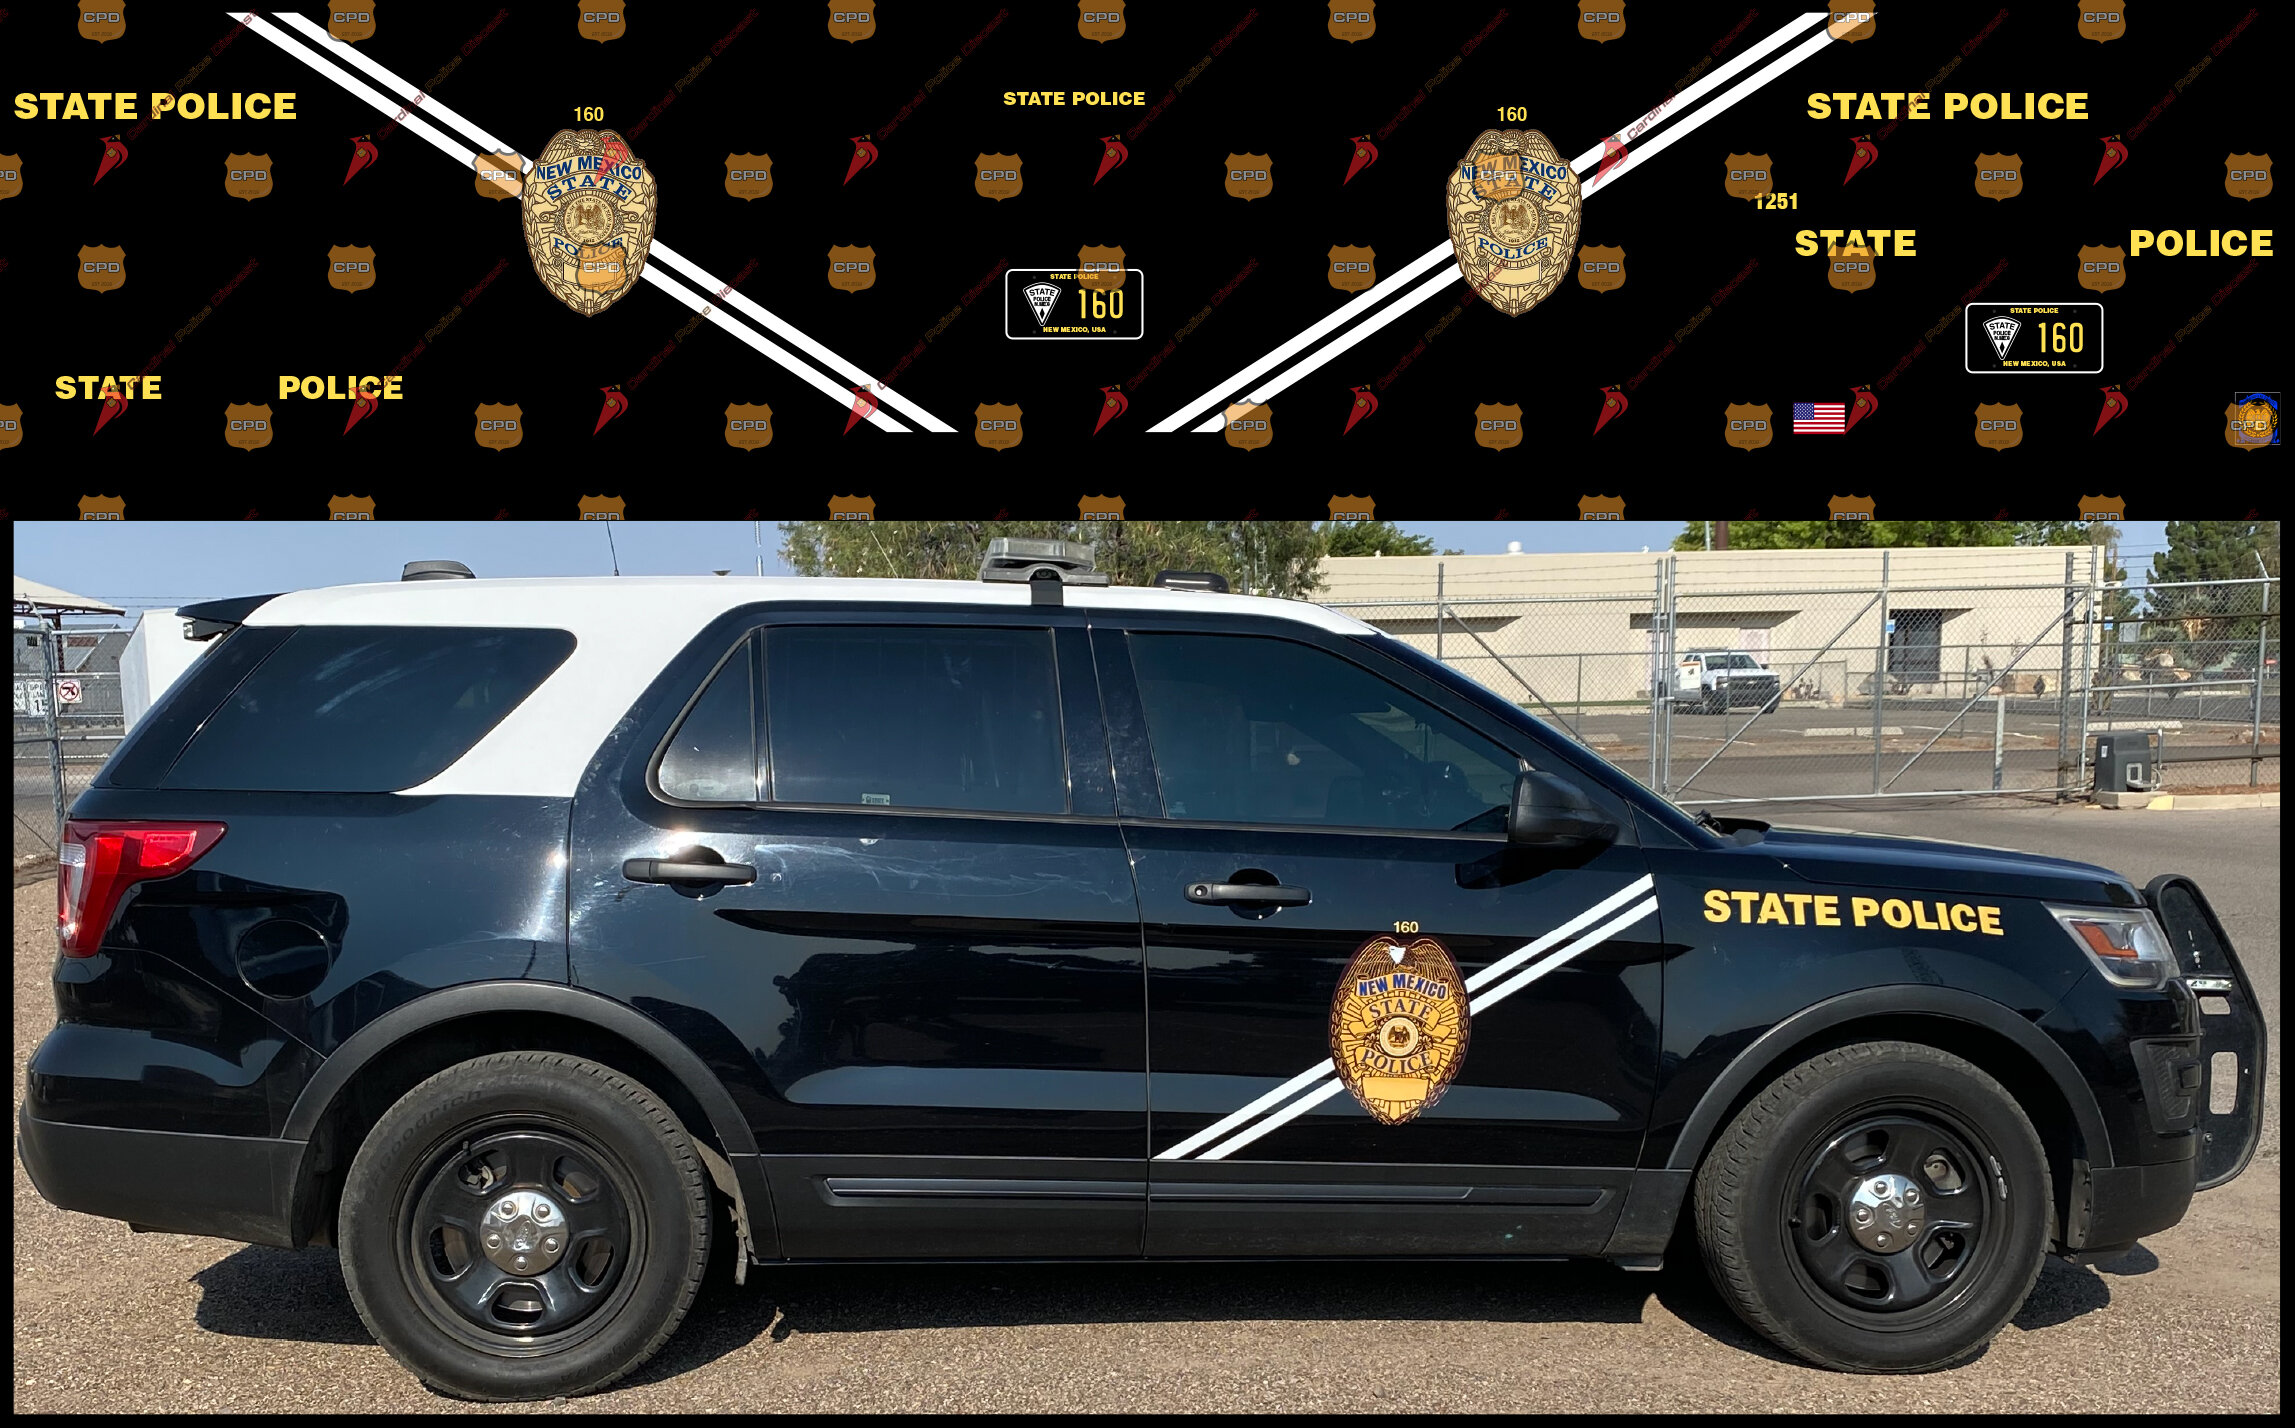 New Mexico State Police 1 18 Water Slide Decals Fits Motormax Police Suv Toys And Hobbies Diecast